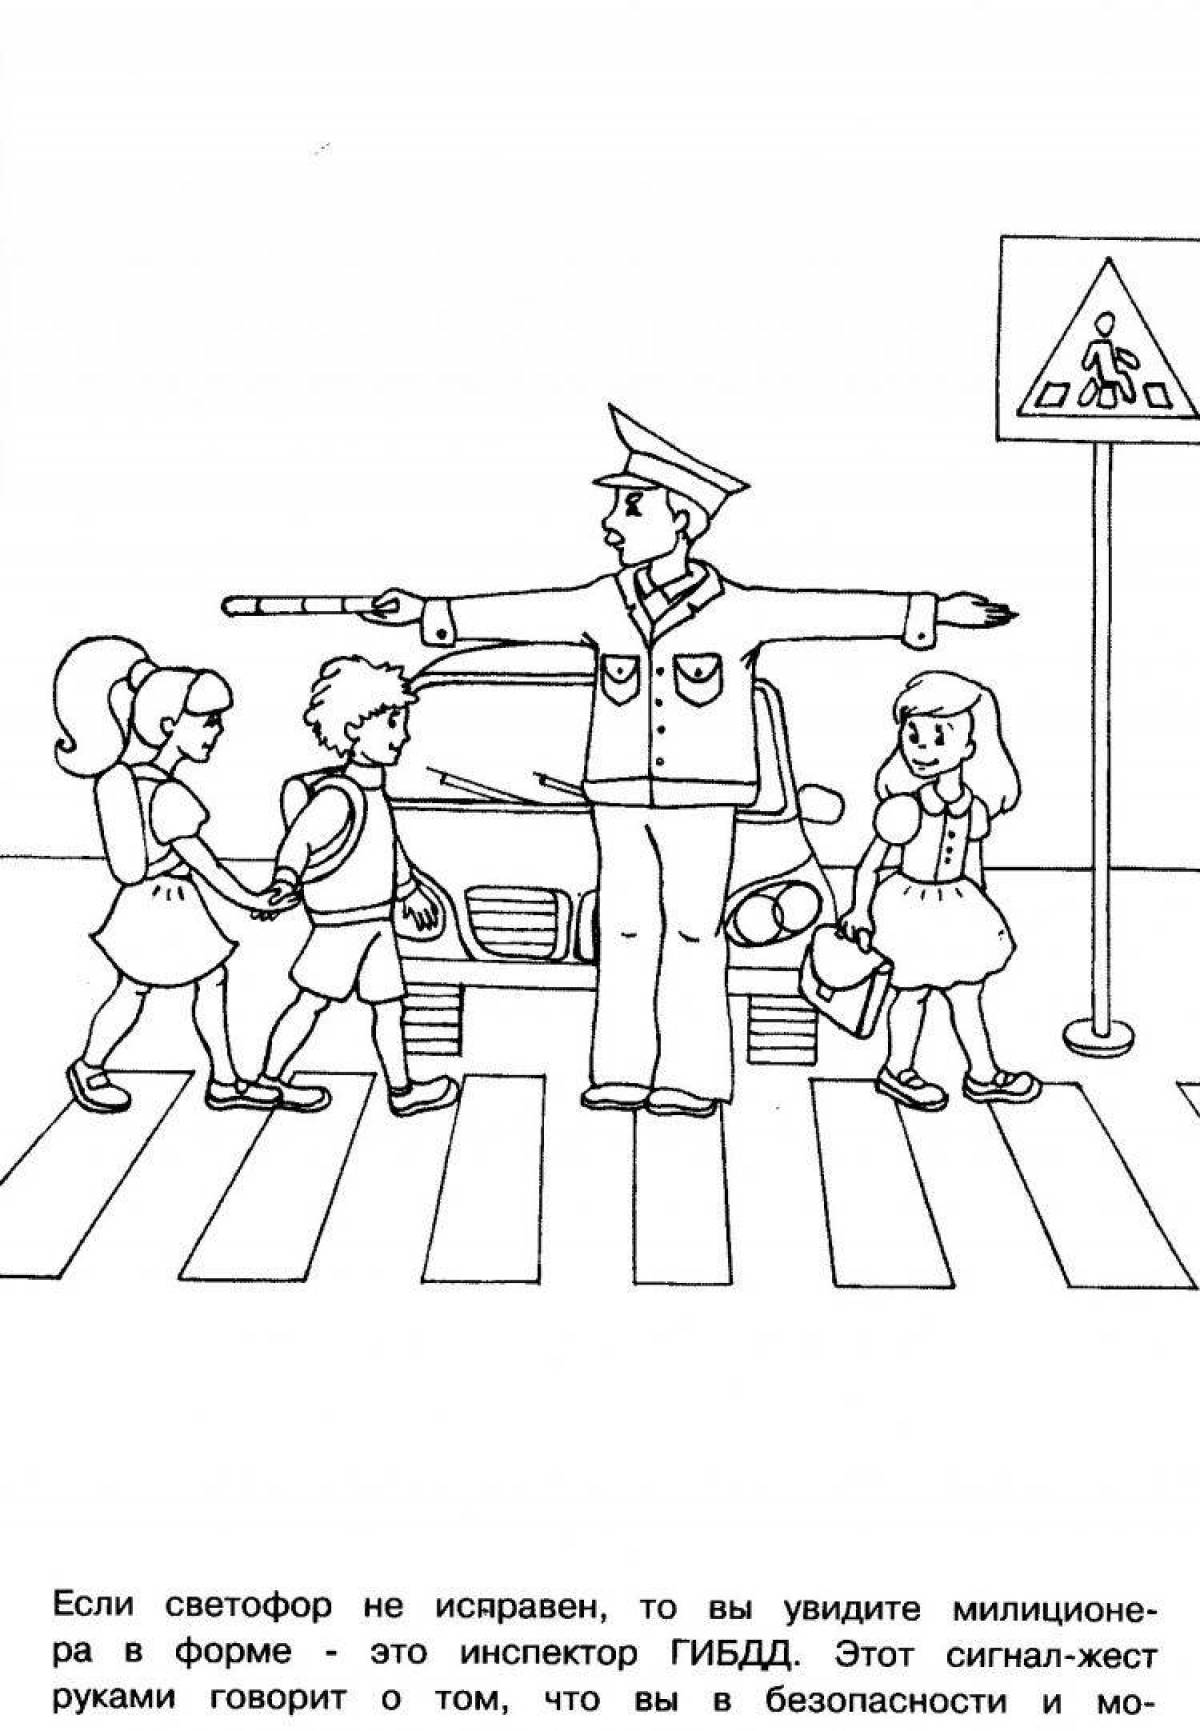 Entertaining rules of the road coloring for children